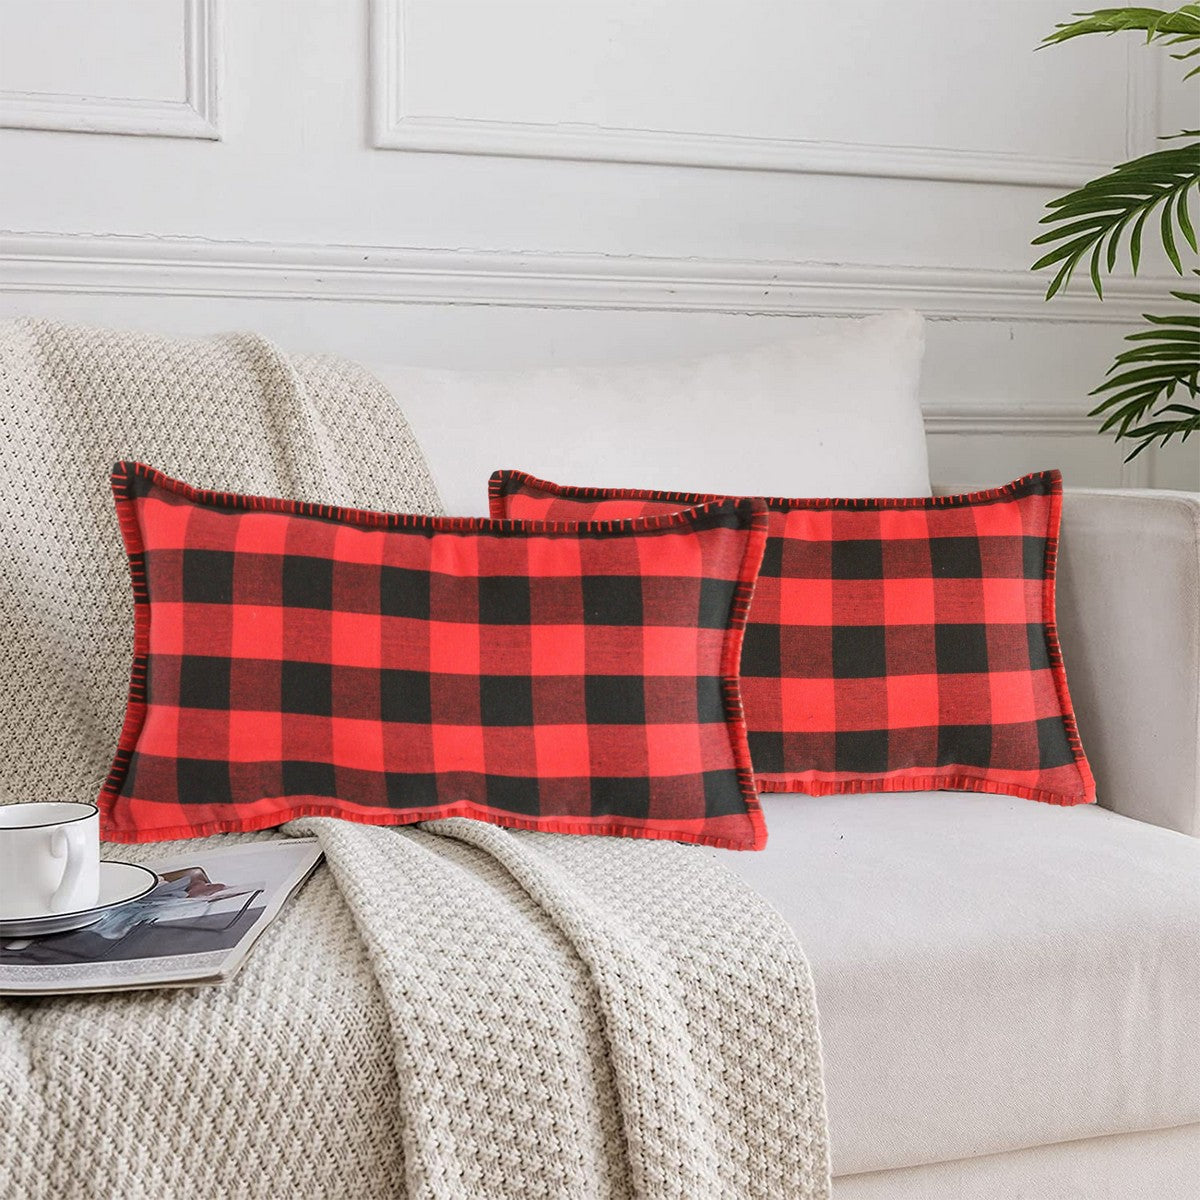 Lushomes Rectangle Cushion Cover with Blanket Stitch, Cotton Sofa Pillow Cover Set of 2, 12x20 Inch, Big Checks, Red and Black Checks, Pillow Cushions Covers (Pack of 2, 30x50 Cms)